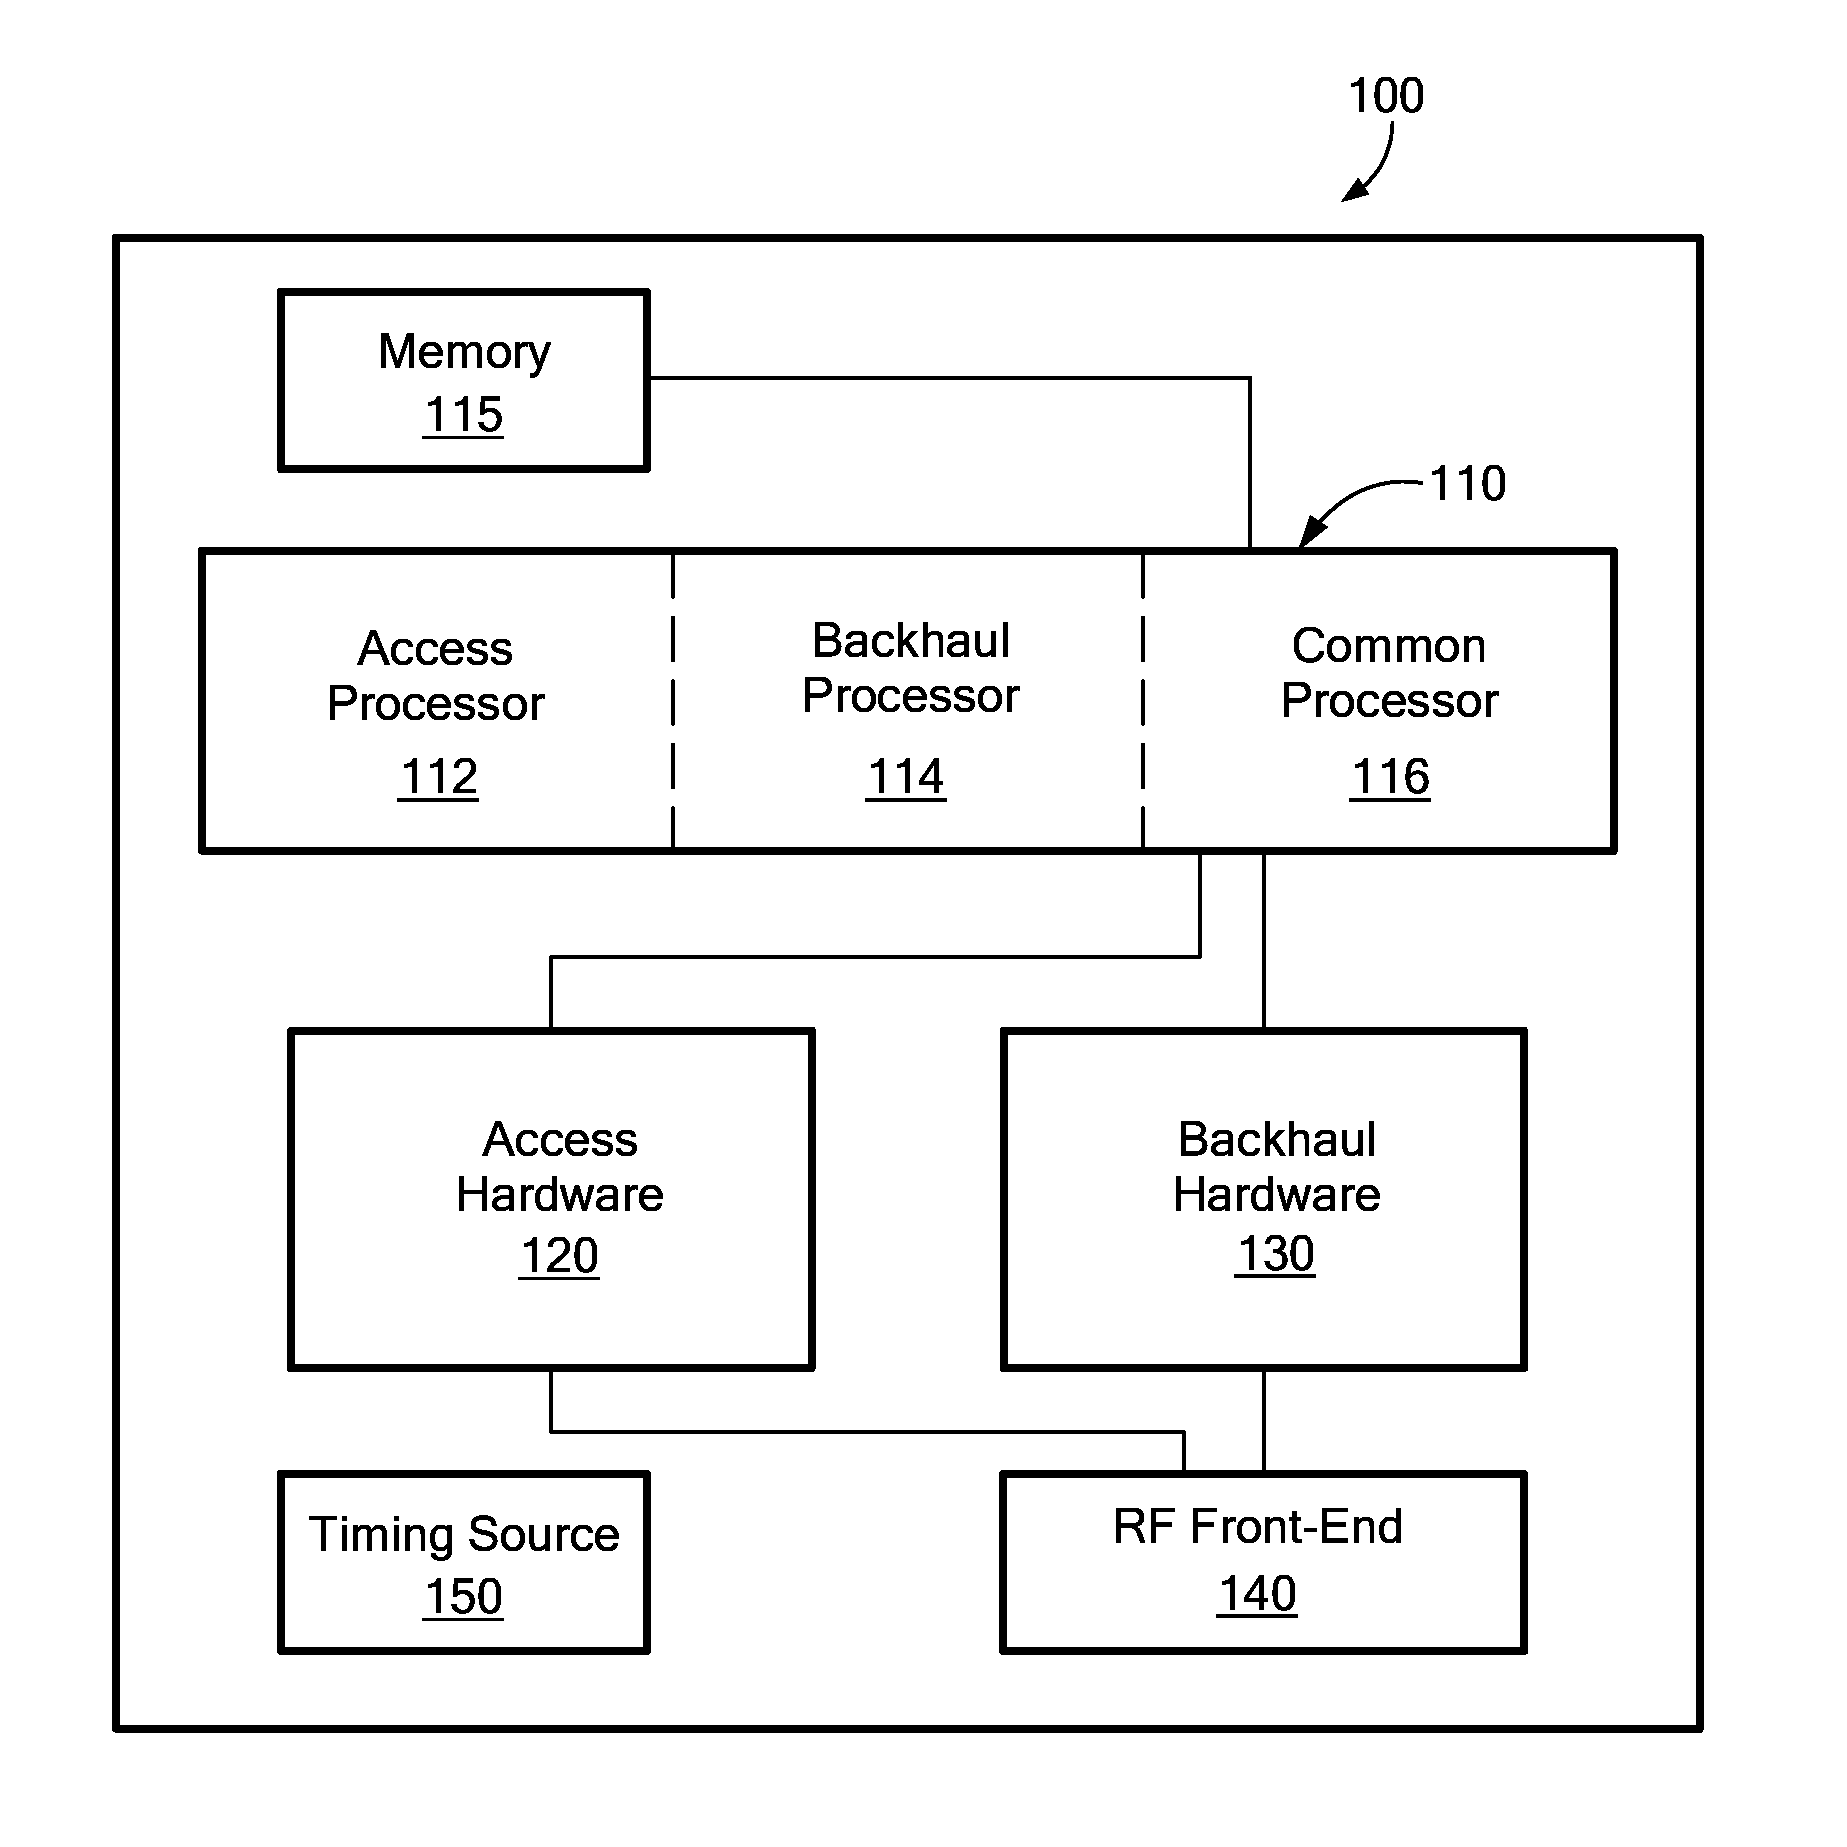 Heterogeneous Self-Organizing Network for Access and Backhaul